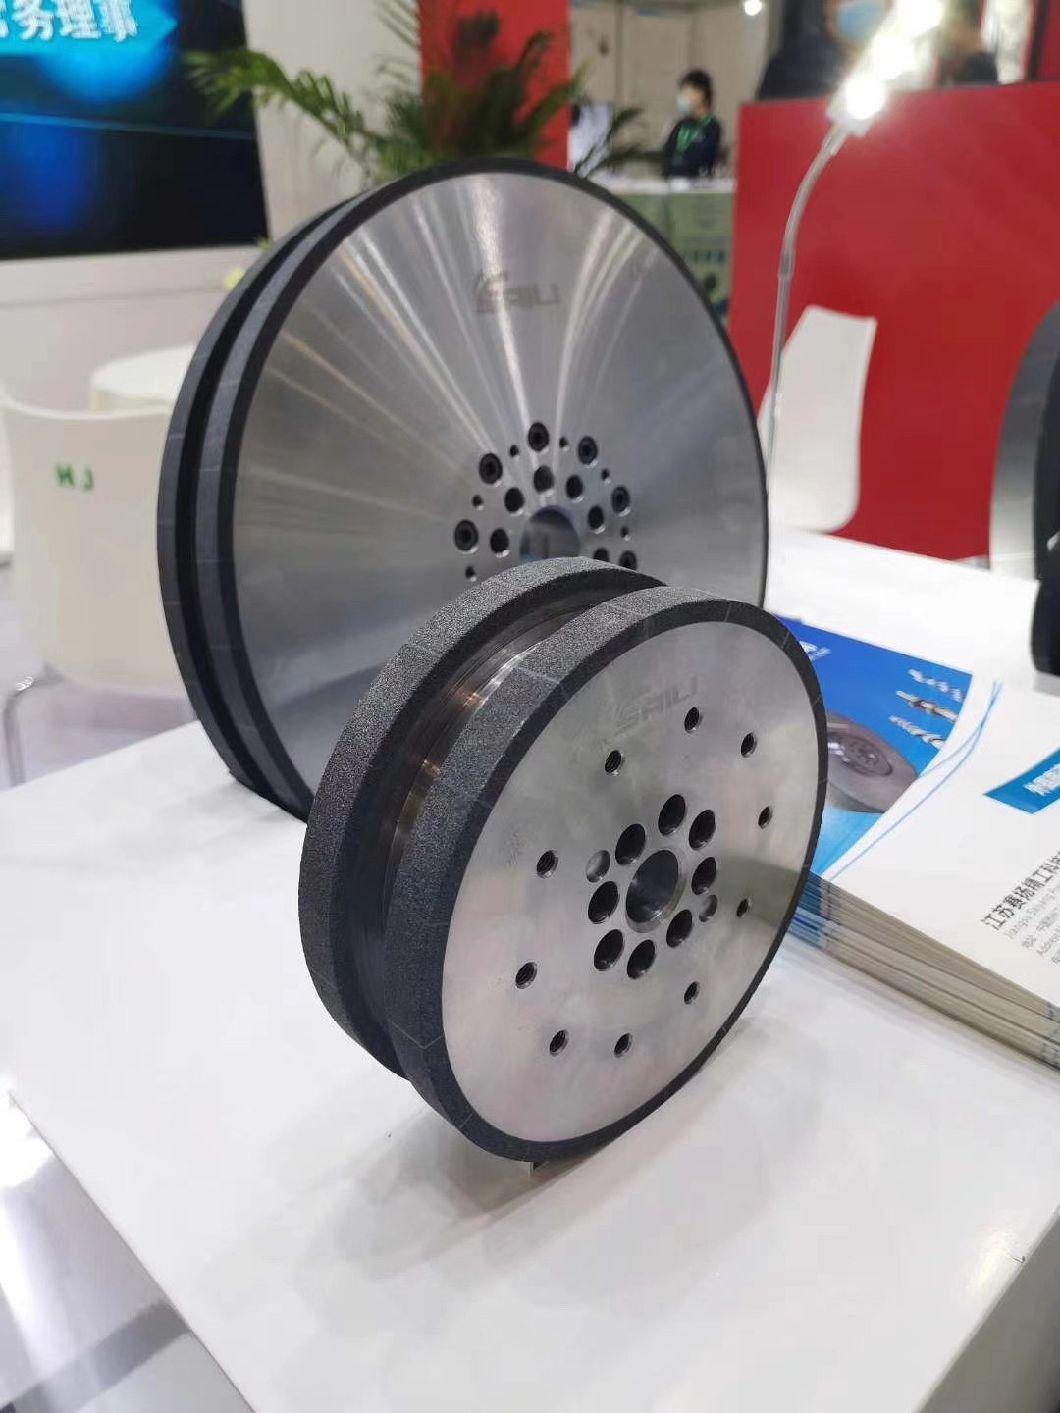 Diamond and CBN Cup Wheels for Grinding of Clearance Surfaces and Face Geometries